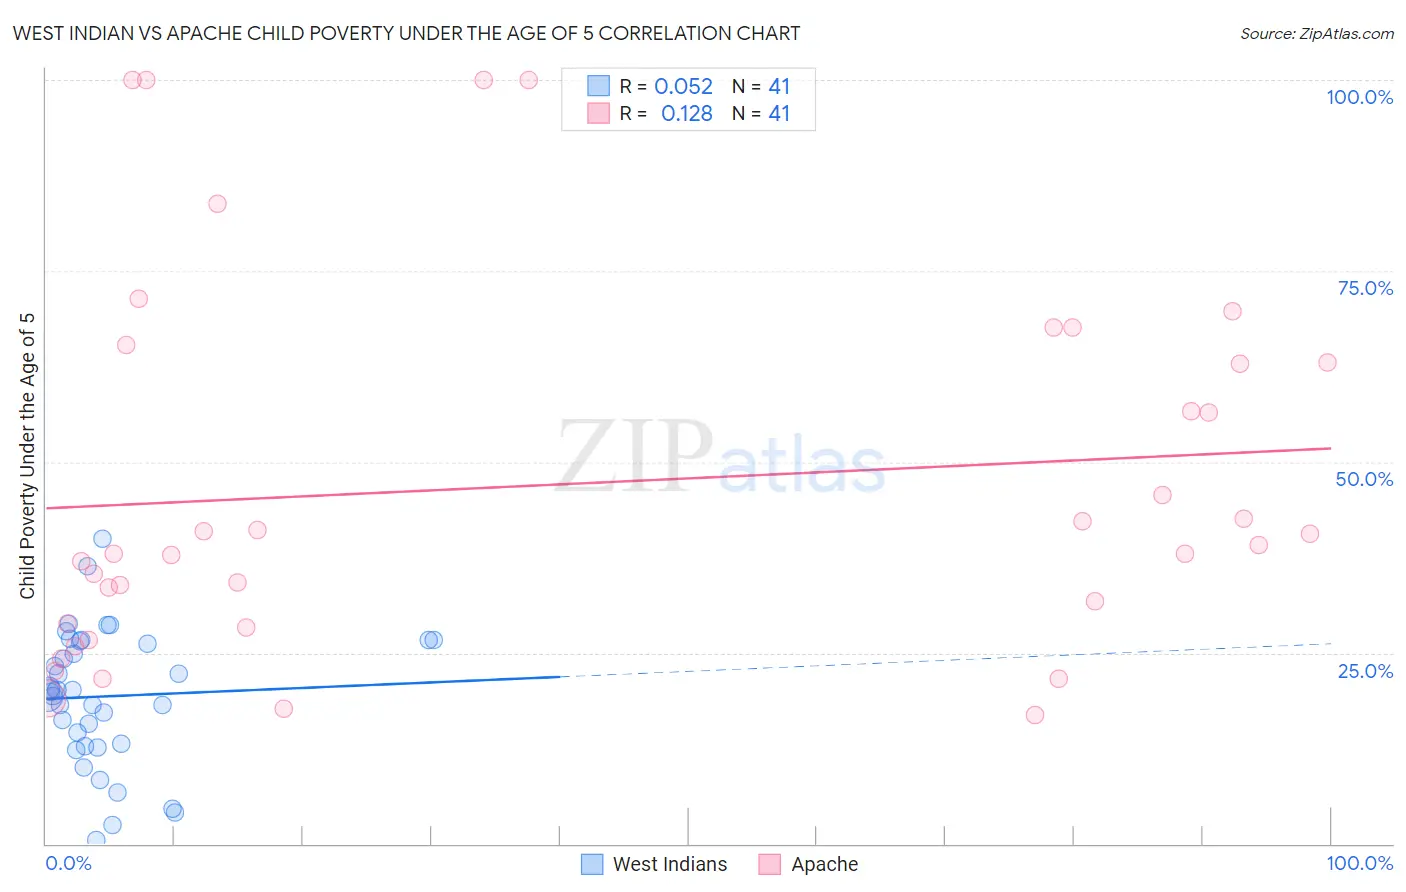 West Indian vs Apache Child Poverty Under the Age of 5